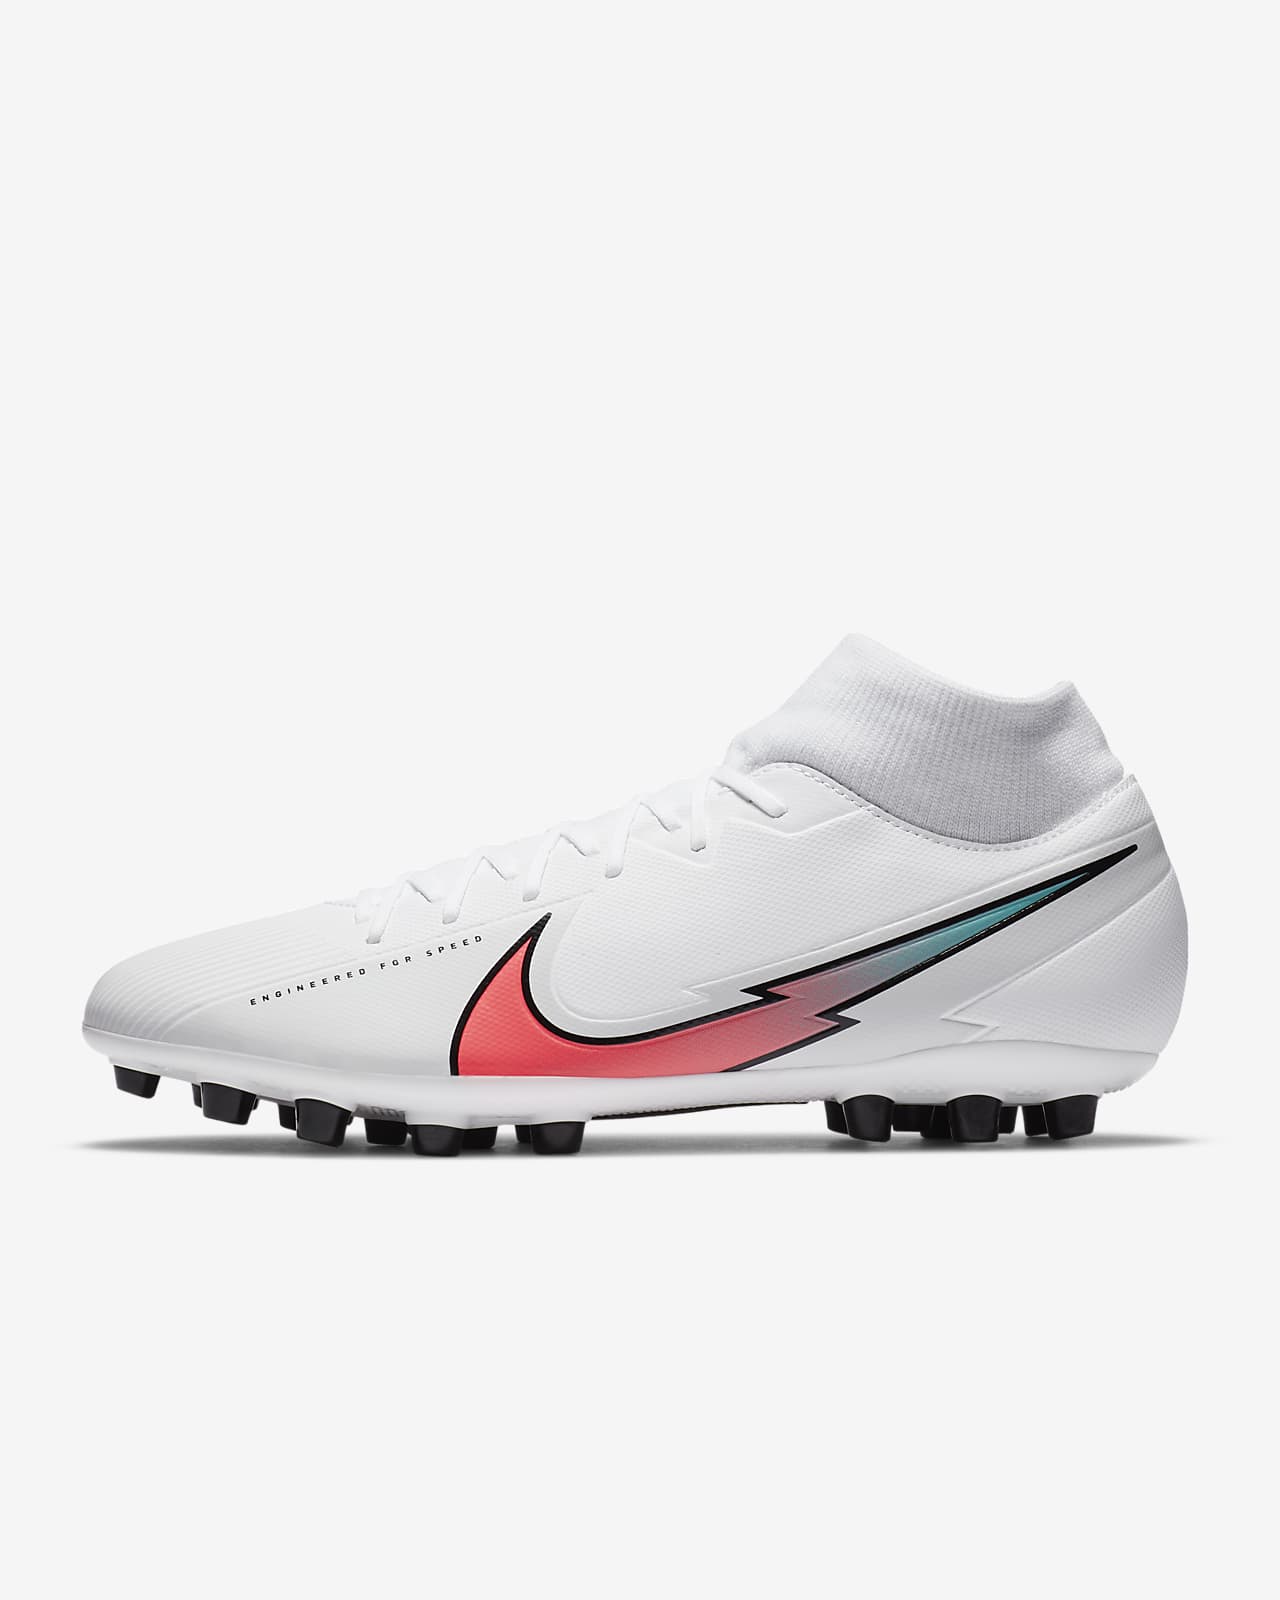 new nike mercurial soccer boots